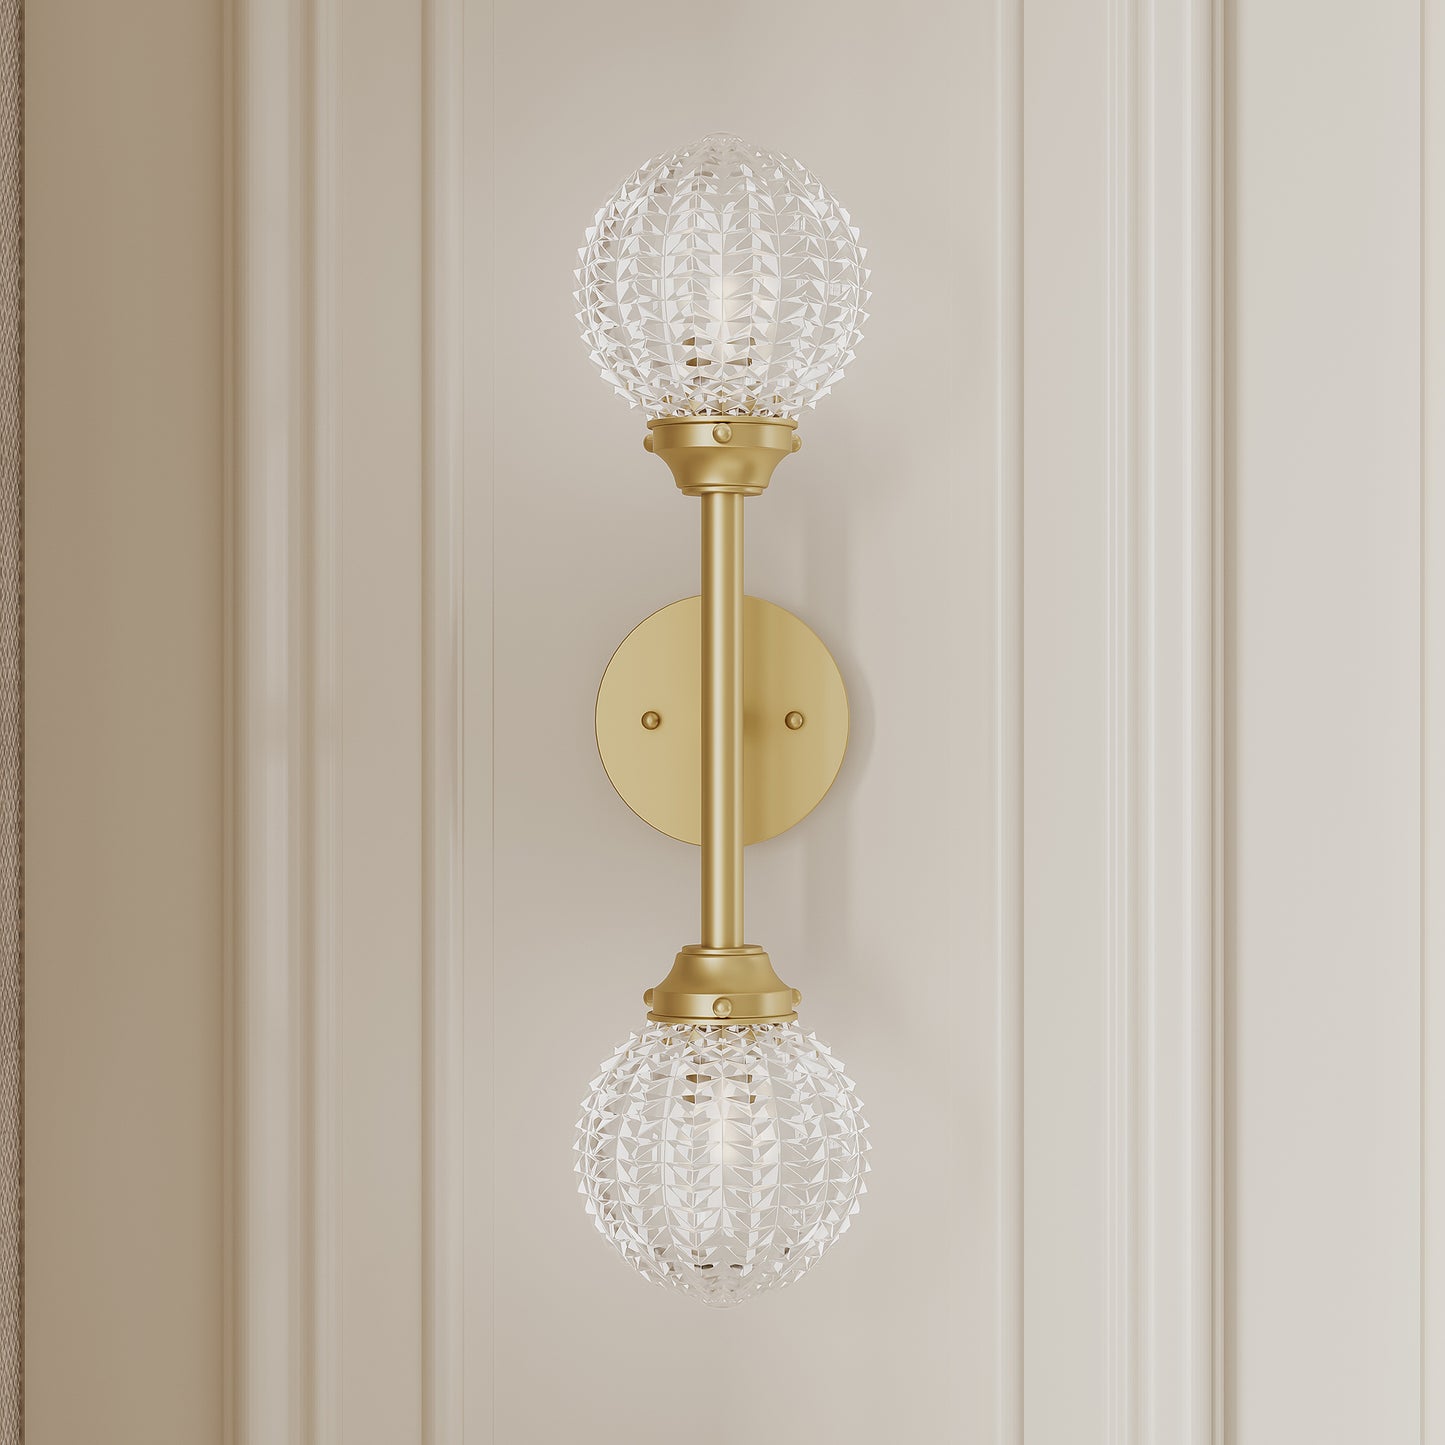 2 light gold glass wall sconce (1) by ACROMA